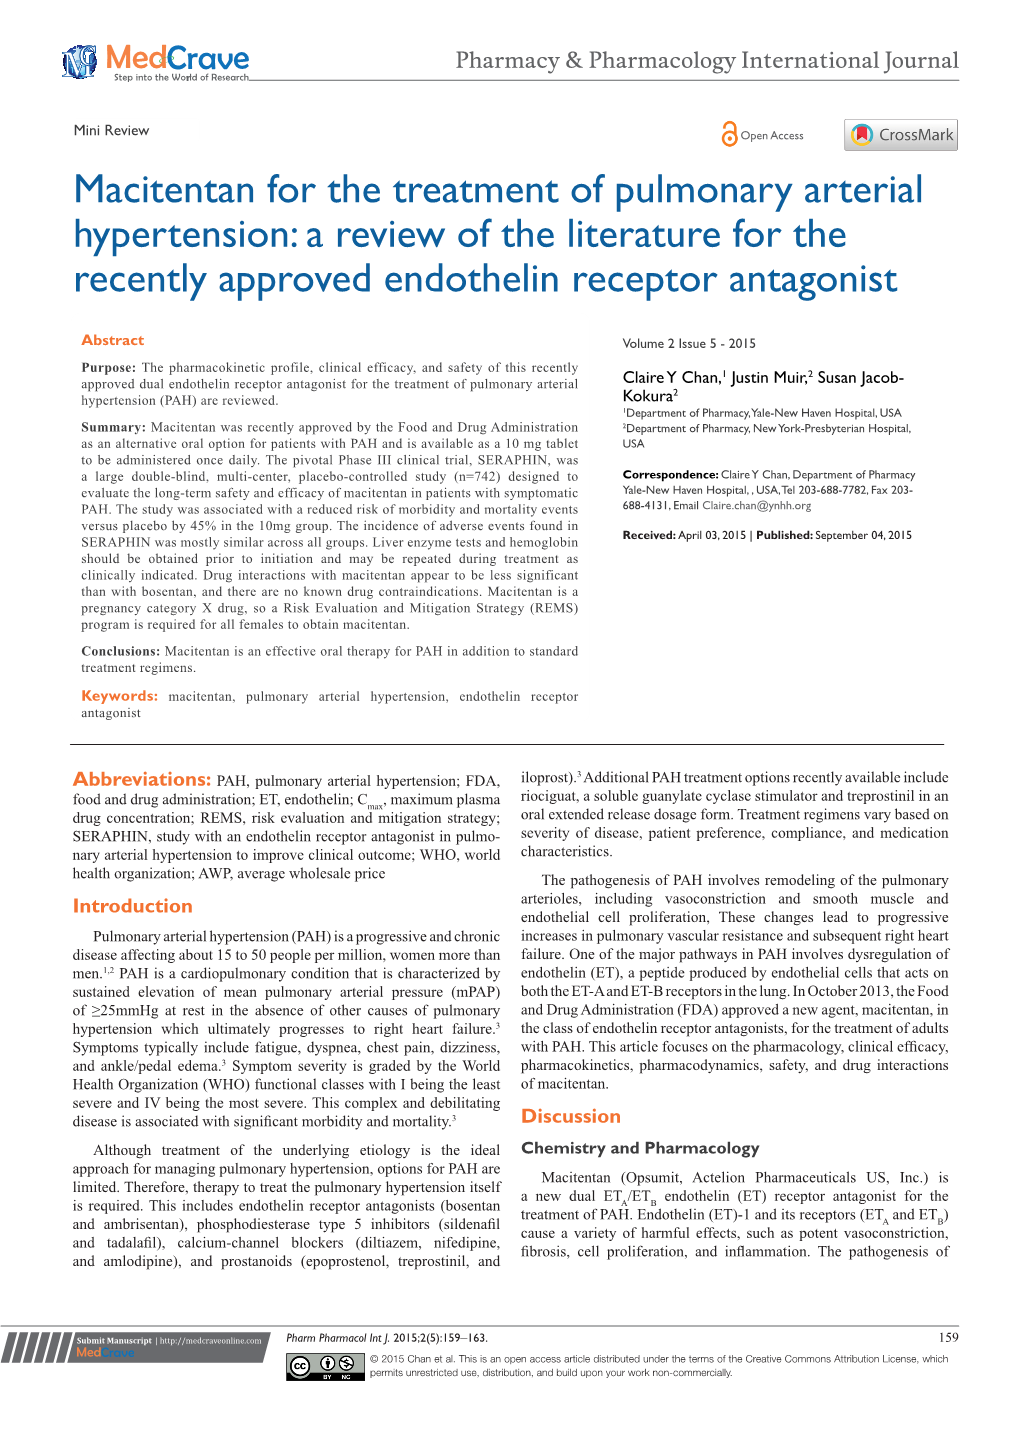 Macitentan for the Treatment of Pulmonary Arterial Hypertension: a Review of the Literature for the Recently Approved Endothelin Receptor Antagonist